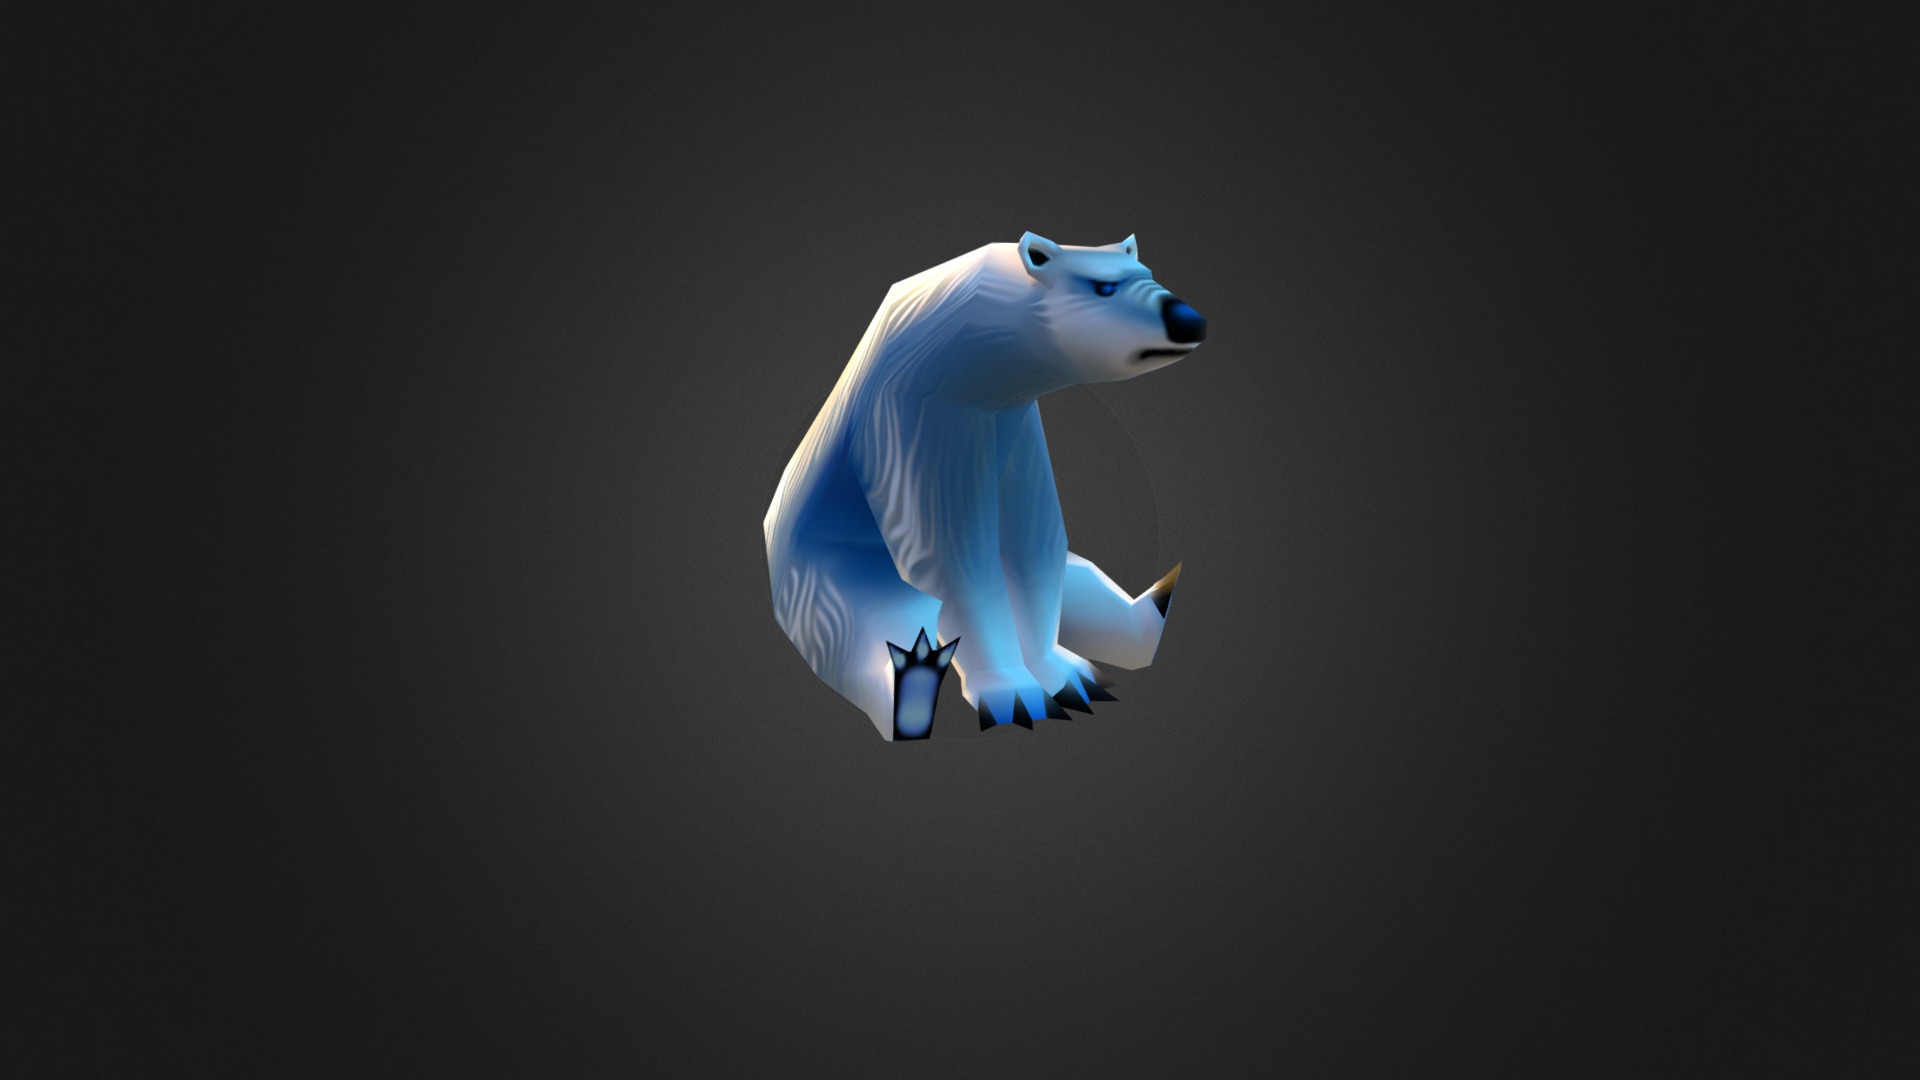 3D model Lowpoly Bear - This is a 3D model of the Lowpoly Bear. The 3D model is about a blue and white fish.